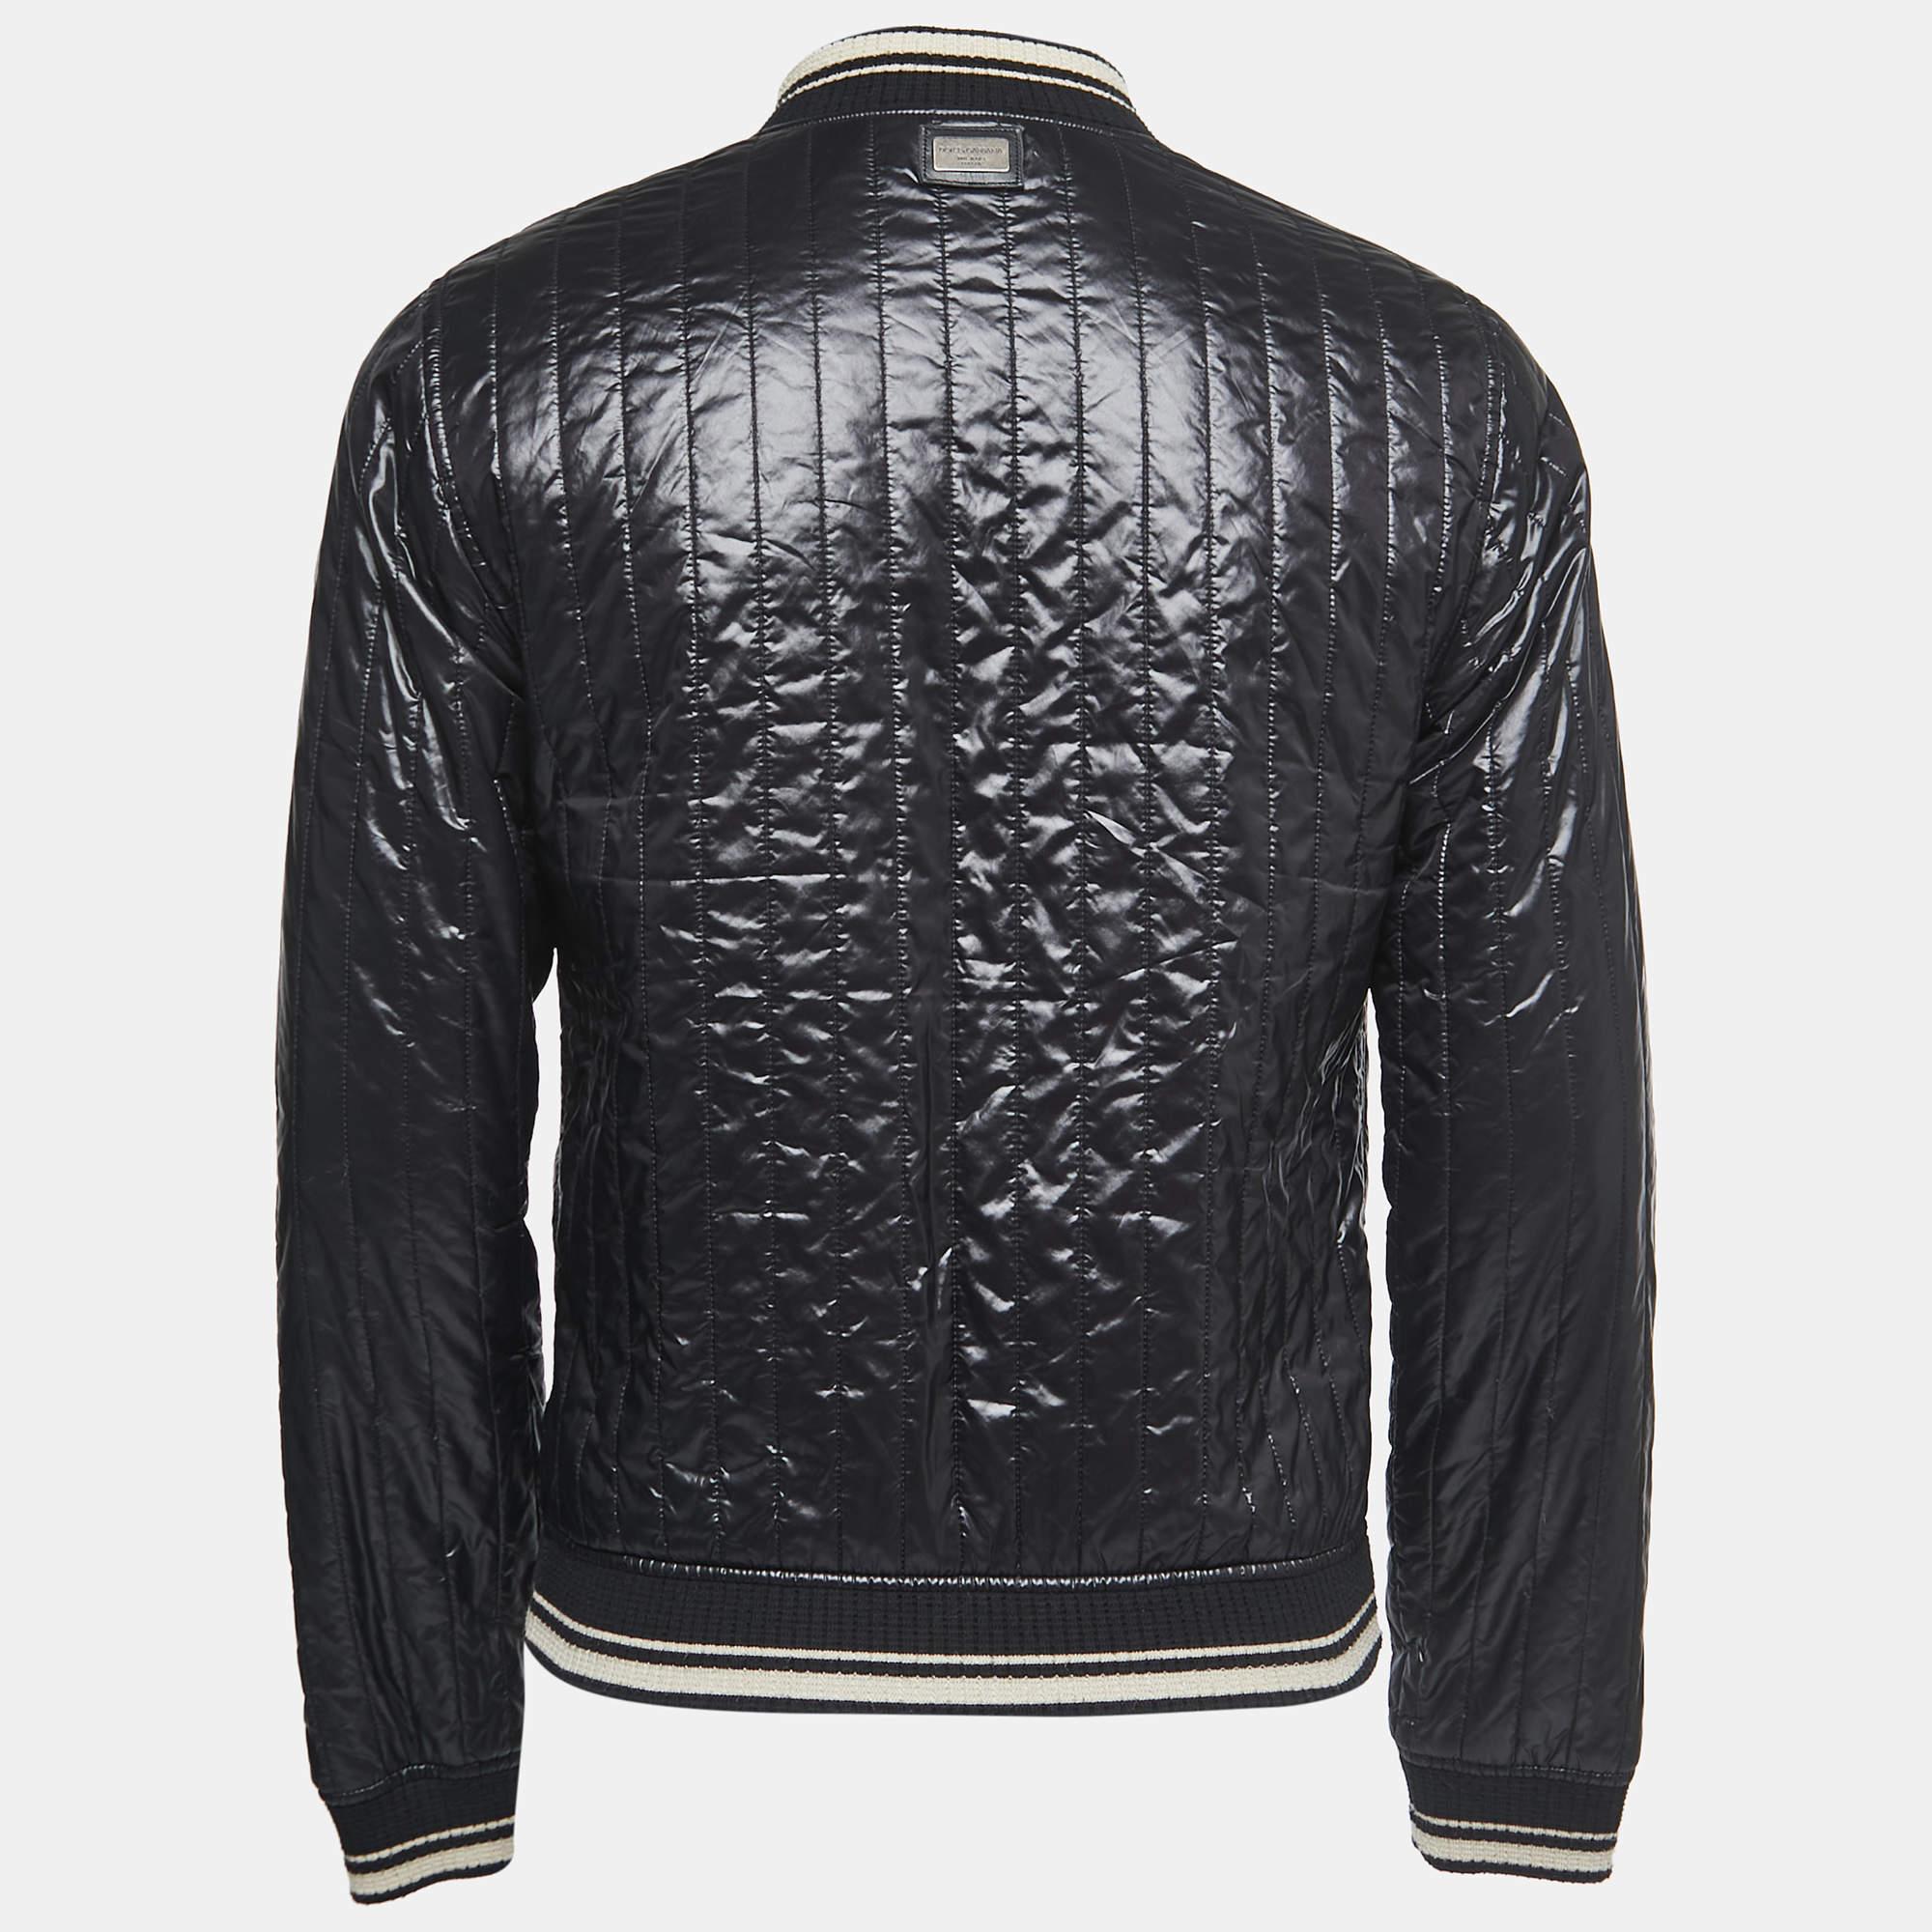 The Dolce & Gabbana Black Bomber Jacket exudes sleek and contemporary style. Crafted with precision, it features a classic bomber silhouette, a black color palette, and high-quality materials. With its versatile design, this jacket effortlessly